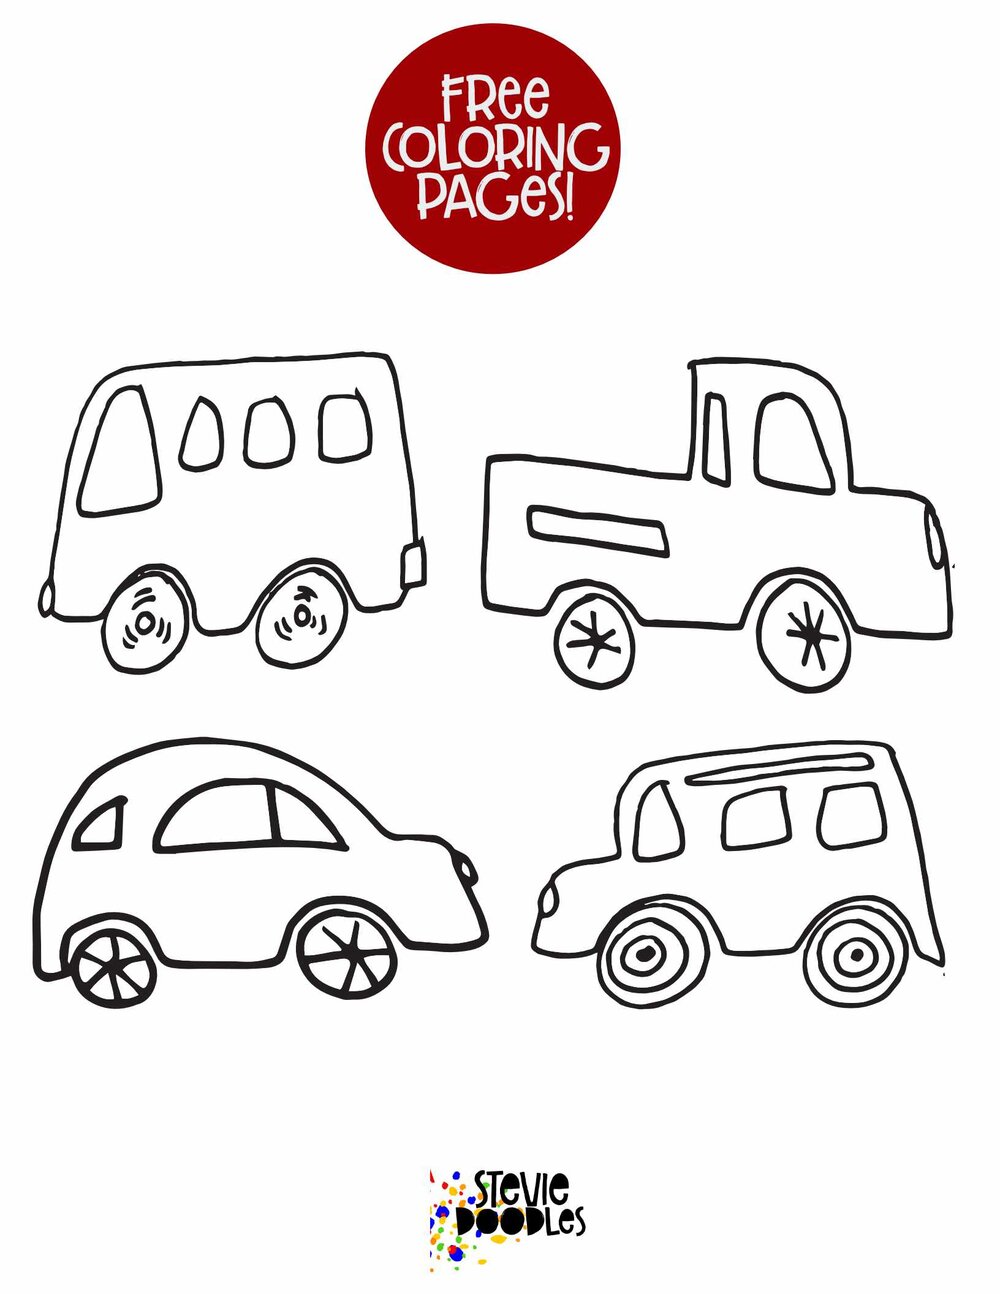 20 Little Cars Free Printable Coloring Page 20 — Stevie Doodles ...